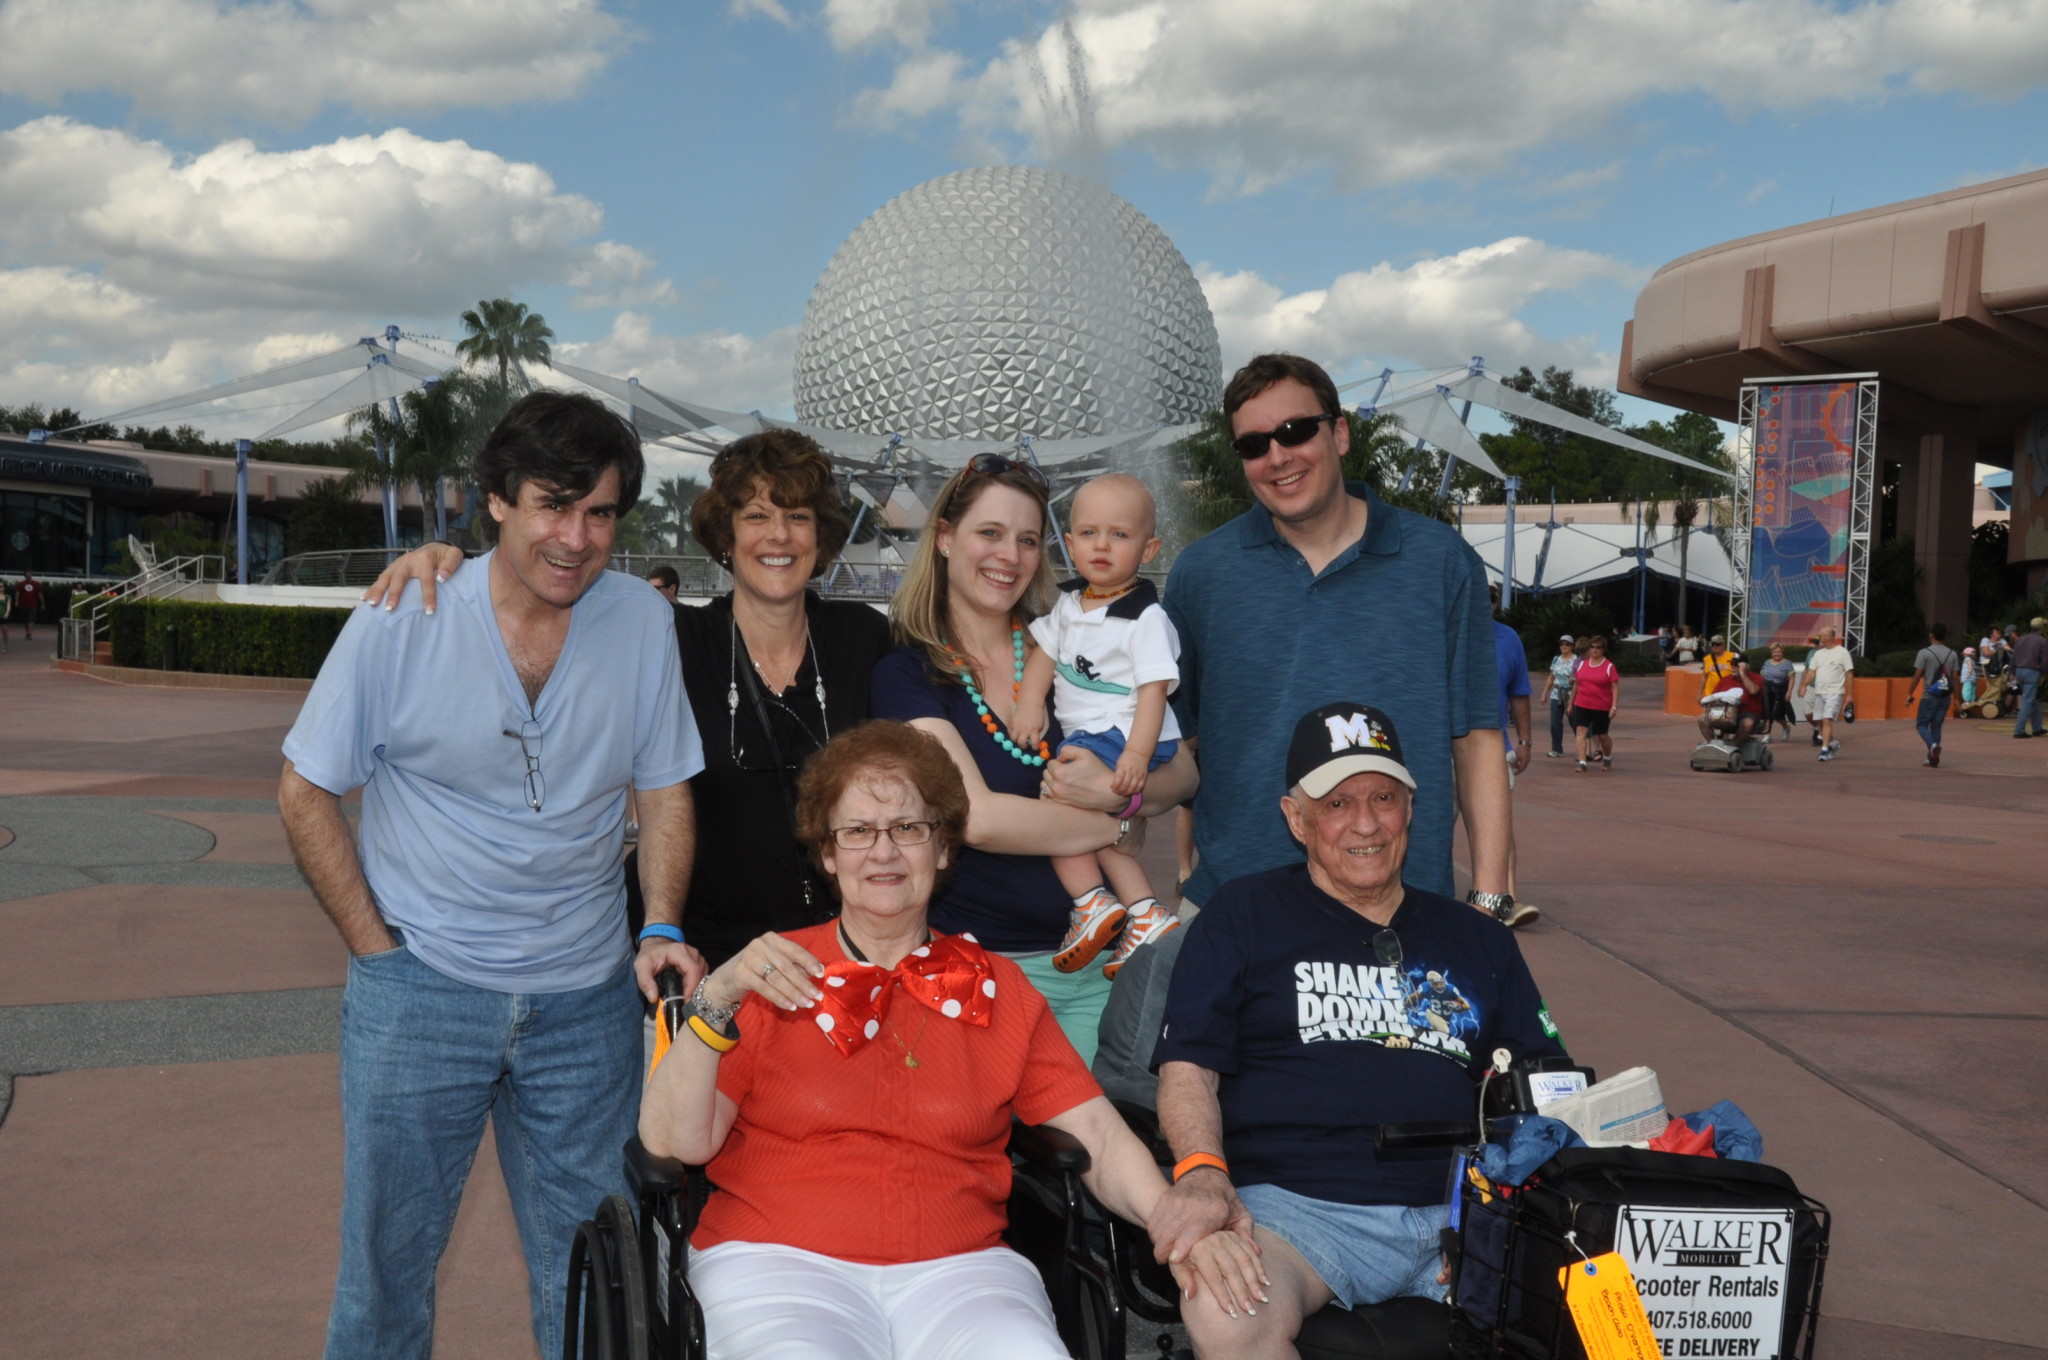 10 Tips for Planning a Magical Multi-Generational Walt Disney World Vacation